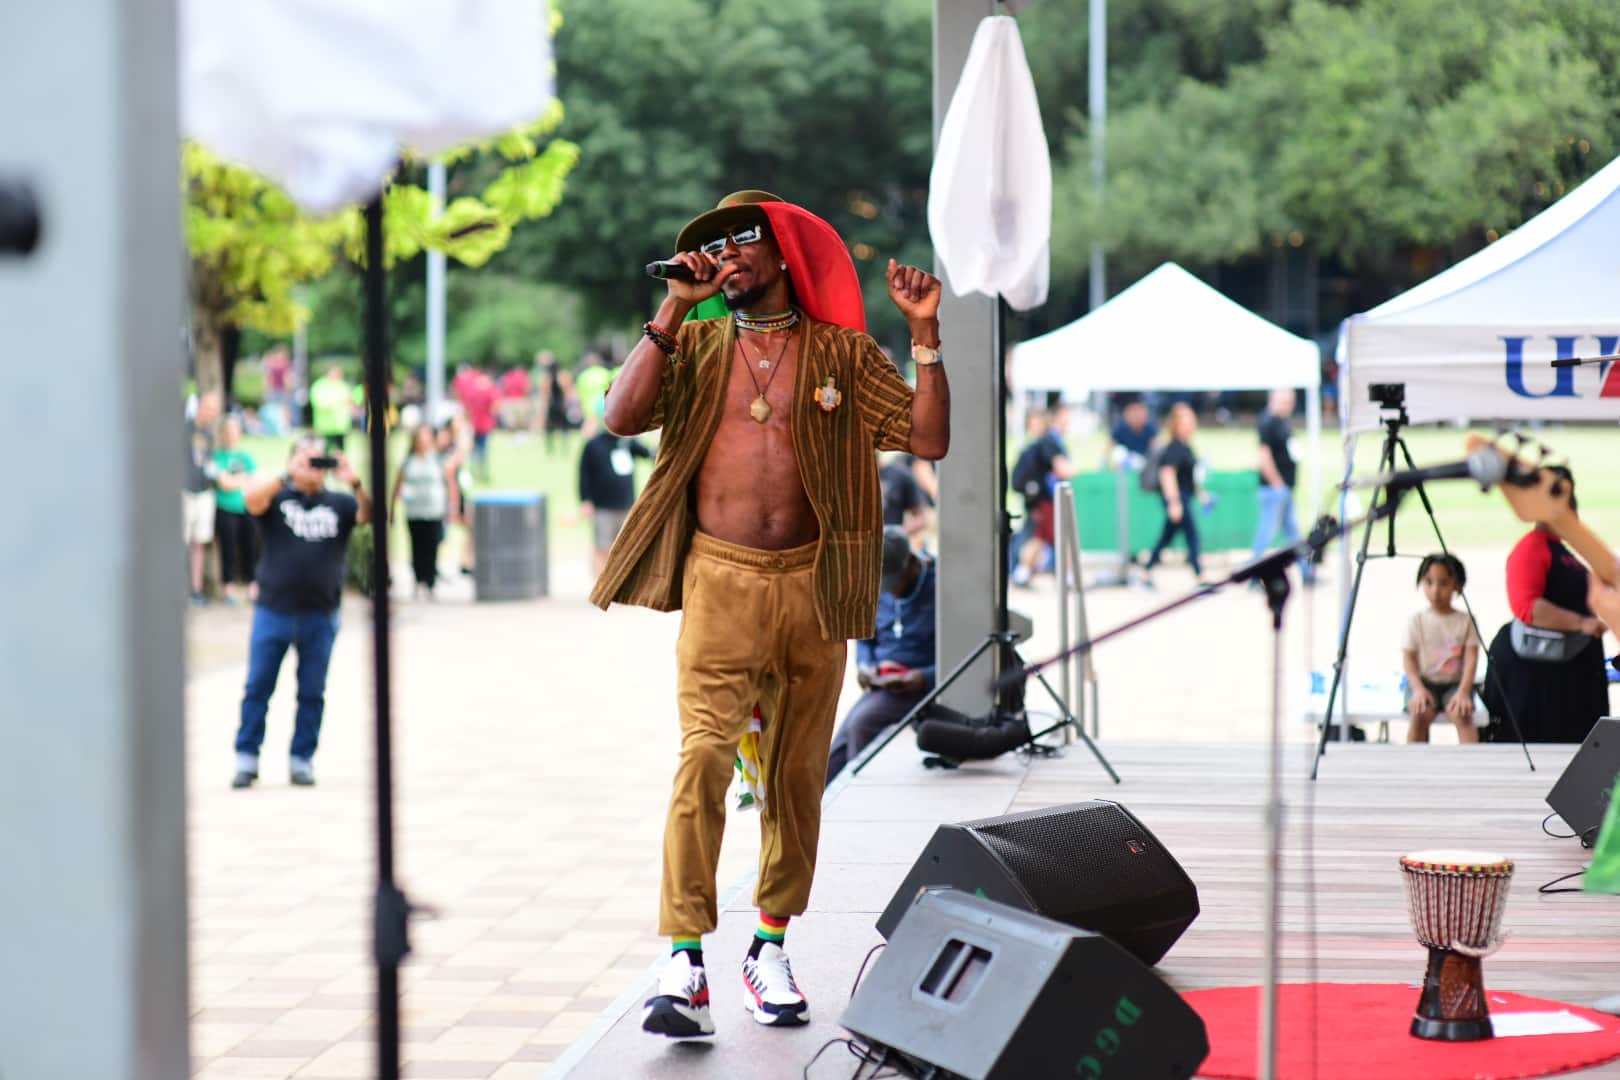 Sunami Force performs at UHD Thursday Night Concerts at Discovery Green. Photo by Jamaal Ellis.